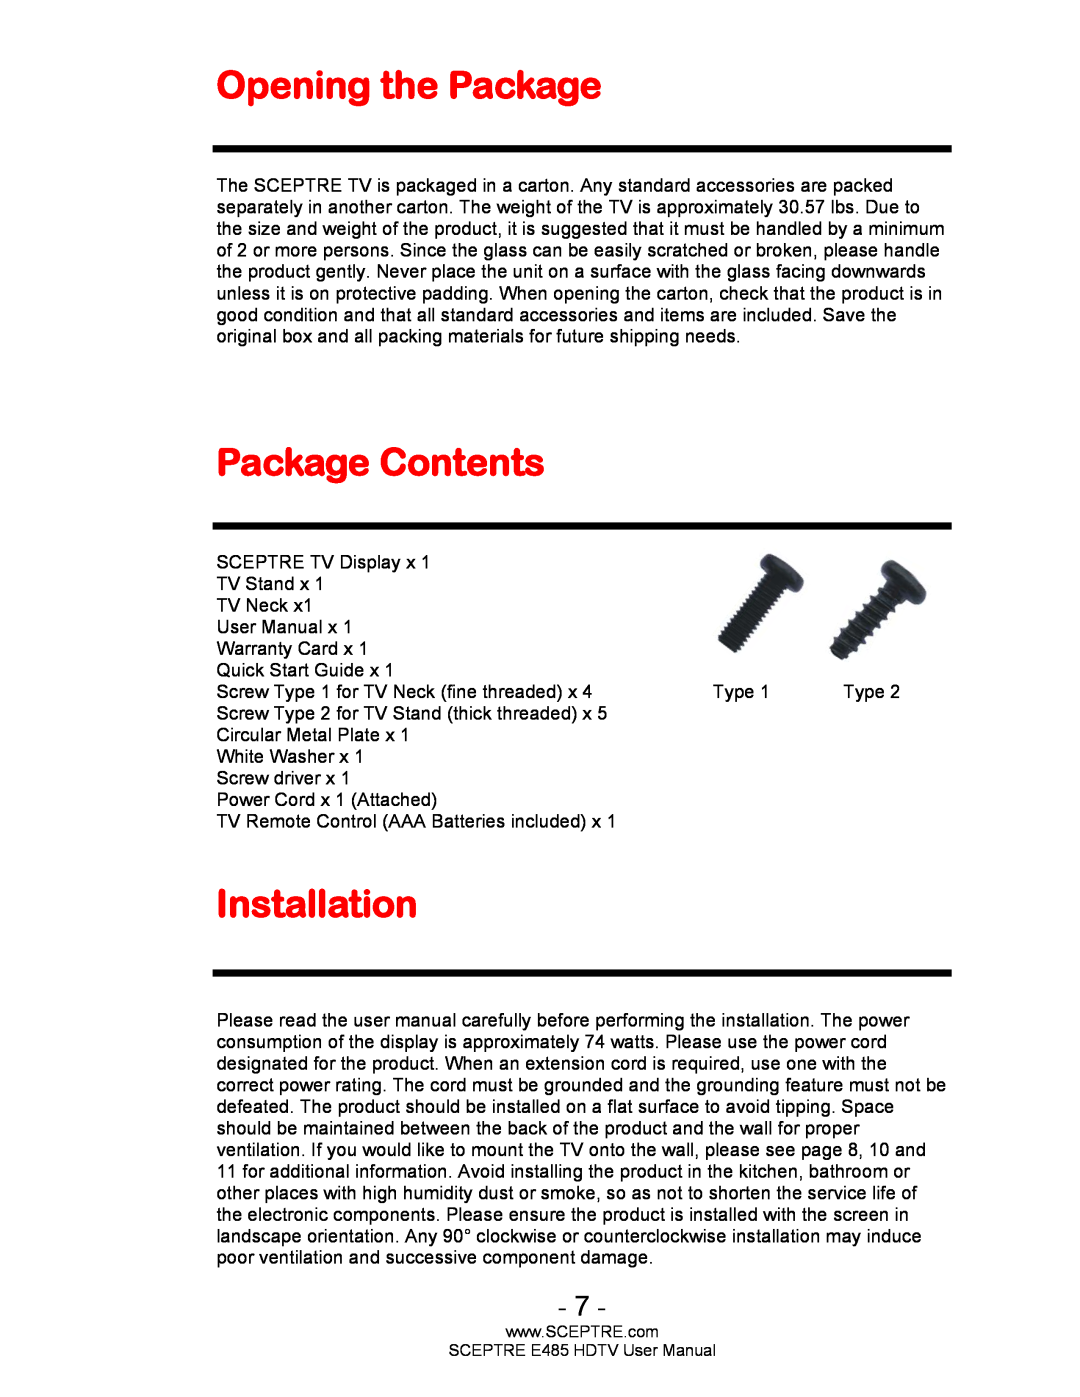 Sceptre Technologies E485 user manual Opening the Package, Package Contents, Installation 